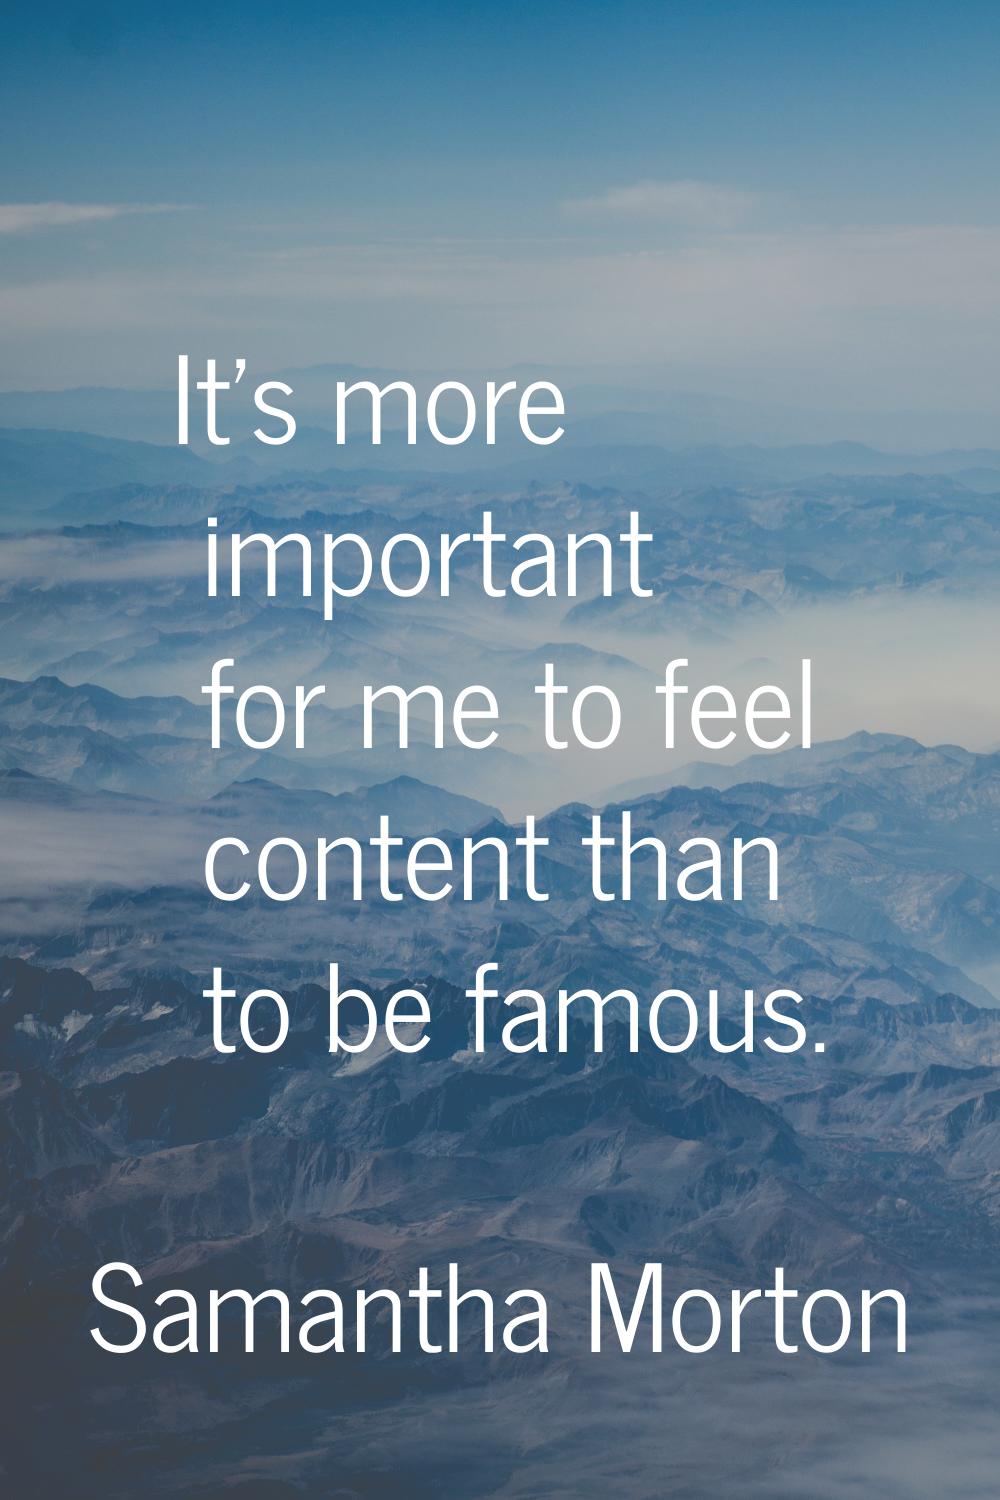 It's more important for me to feel content than to be famous.